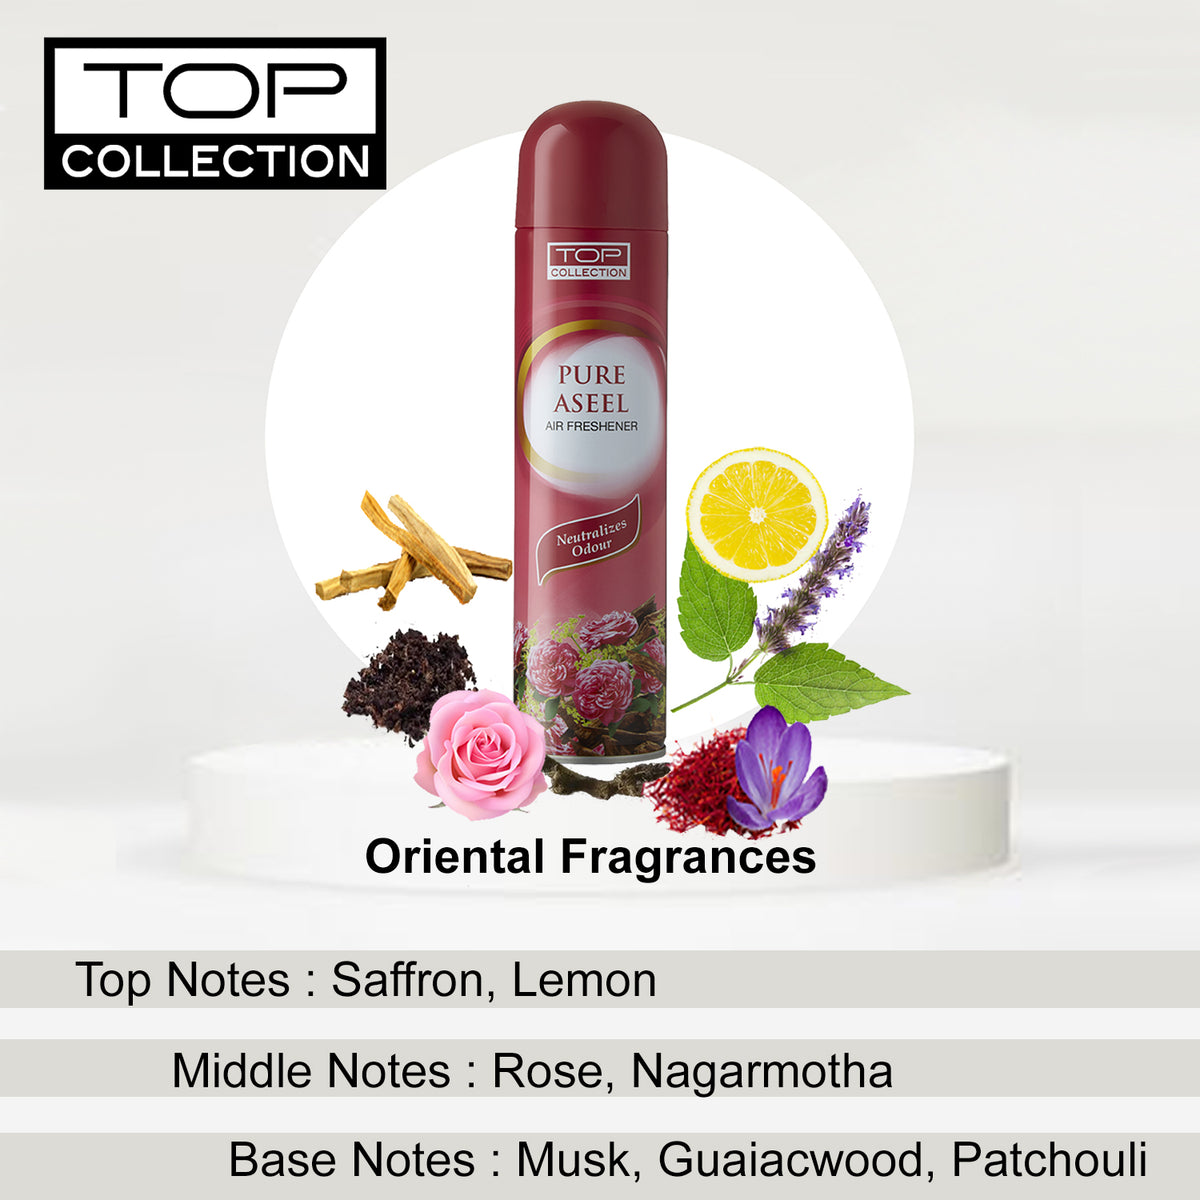 Top Collection Air Freshener - Pure Aseel, 300ml